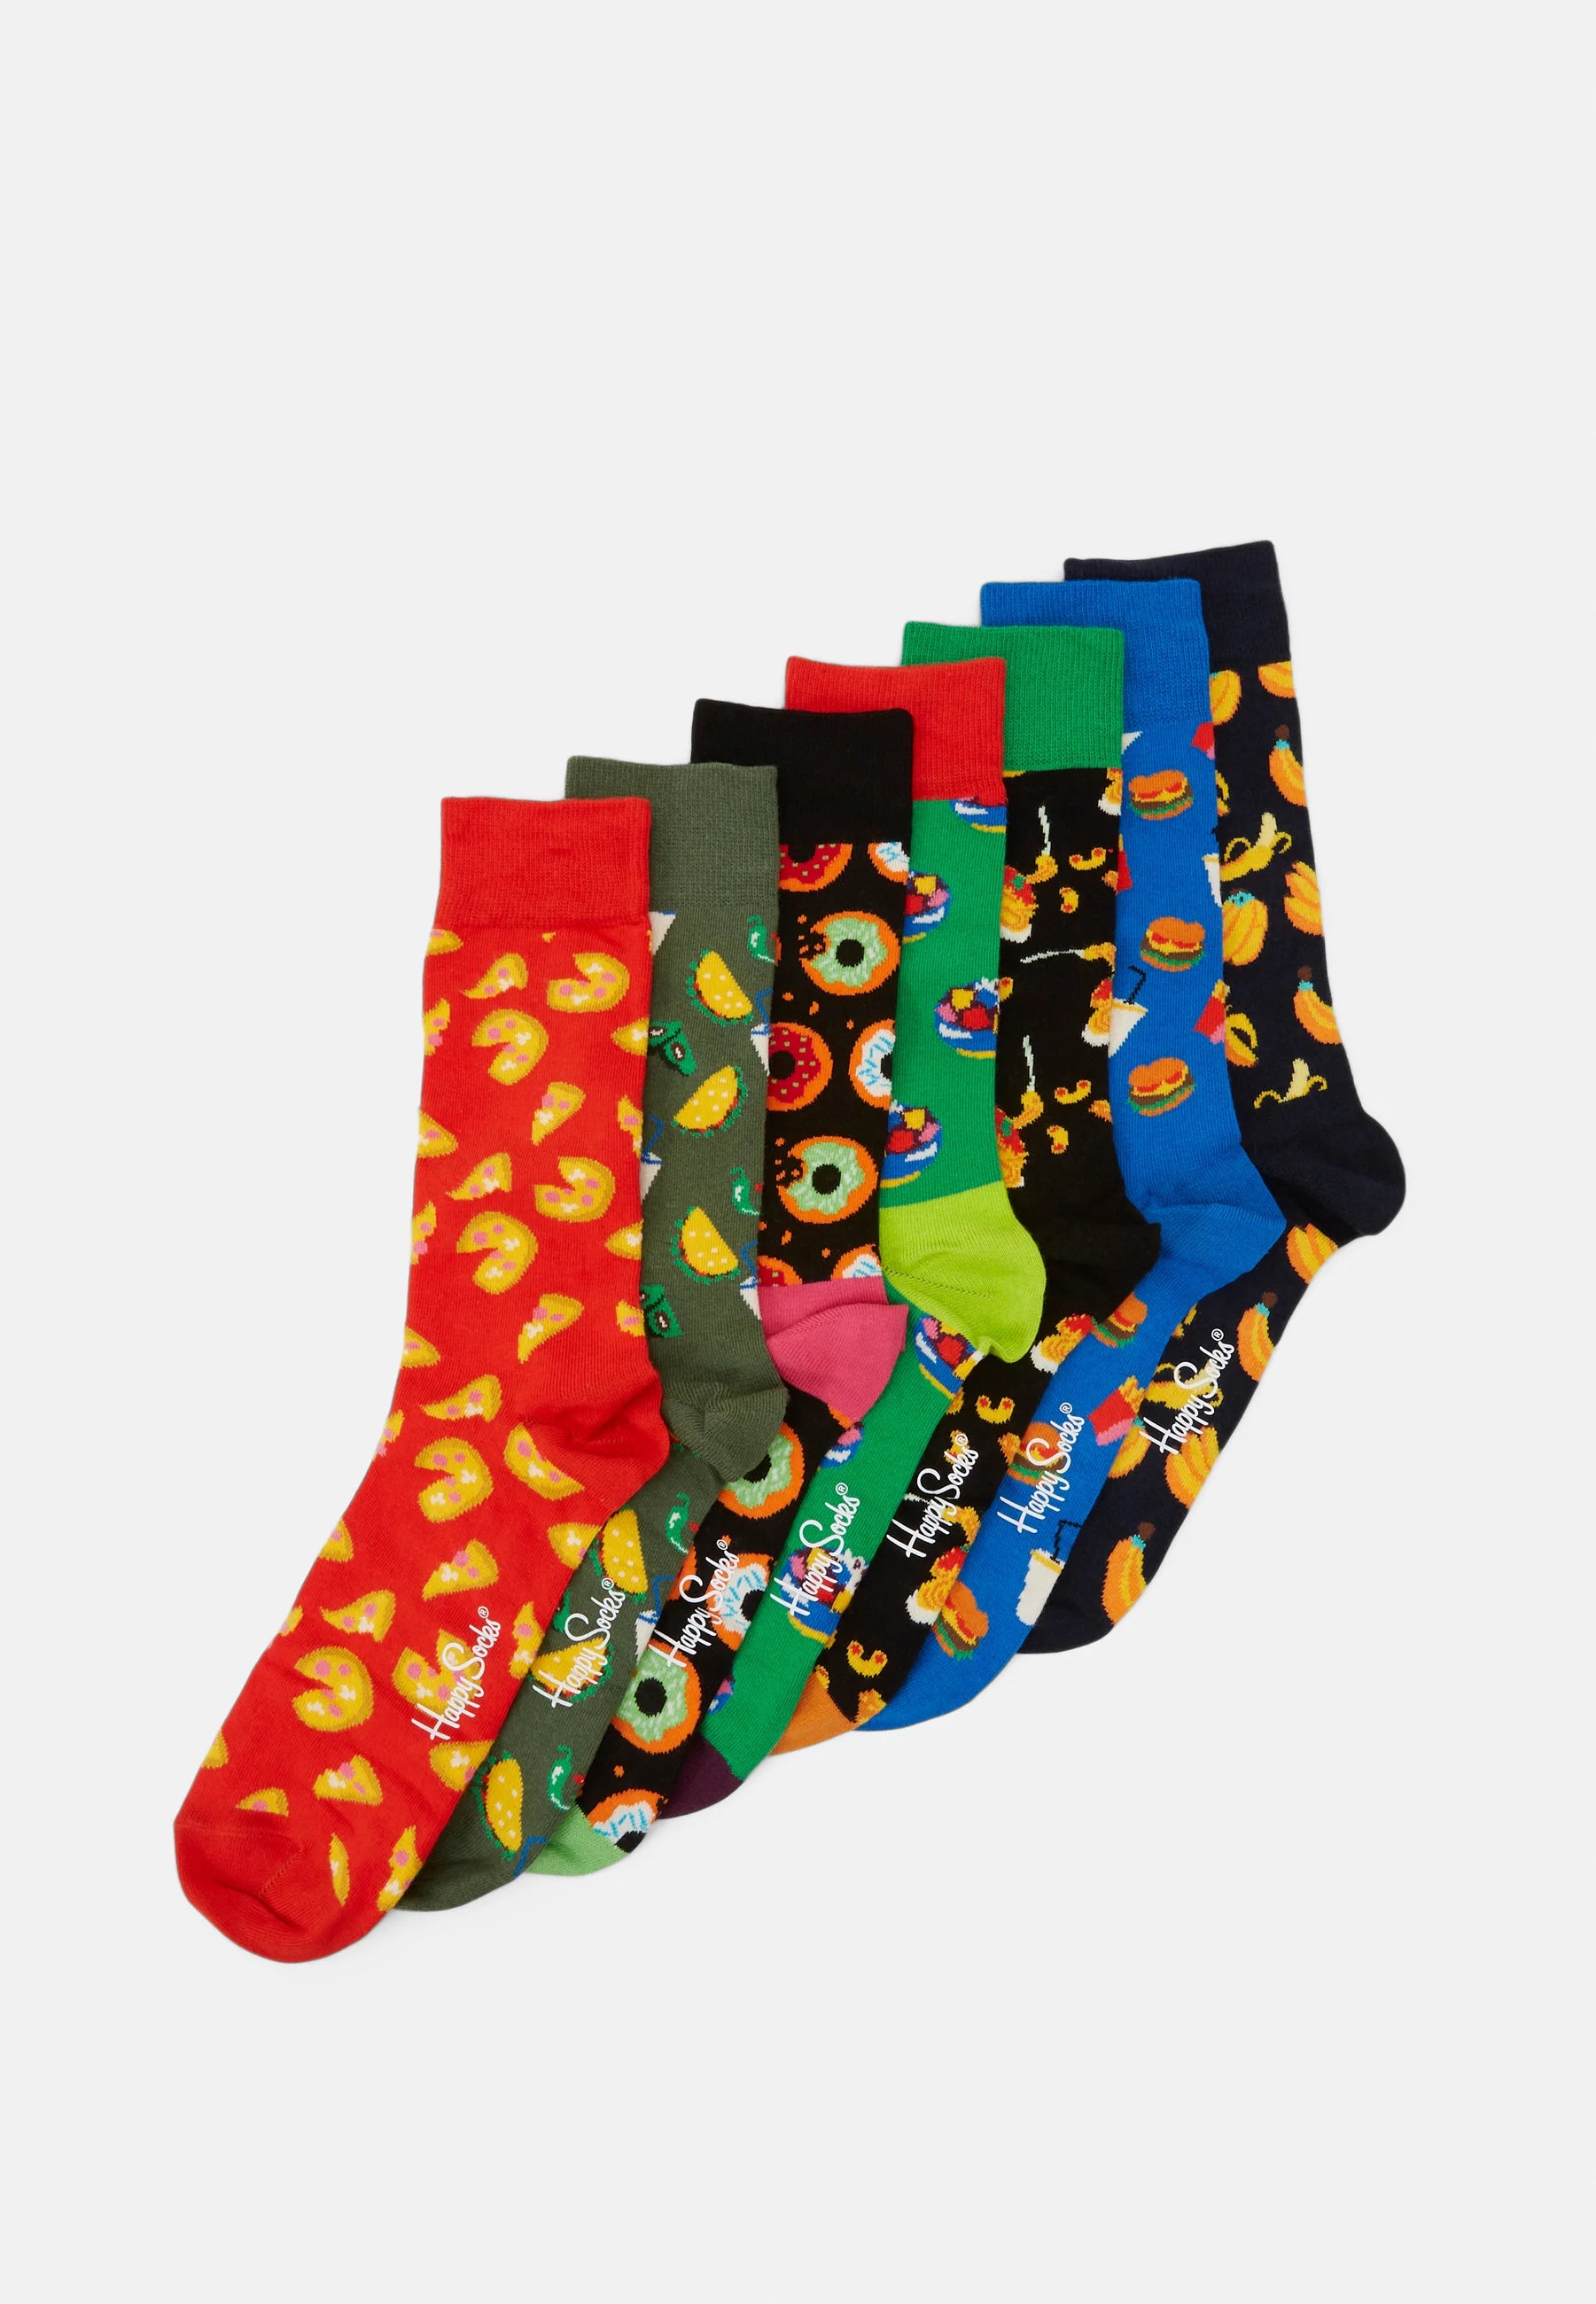 7 DAYS OF FOOD SOCKS GIFT SET 7 PACK - QUEUECAPS